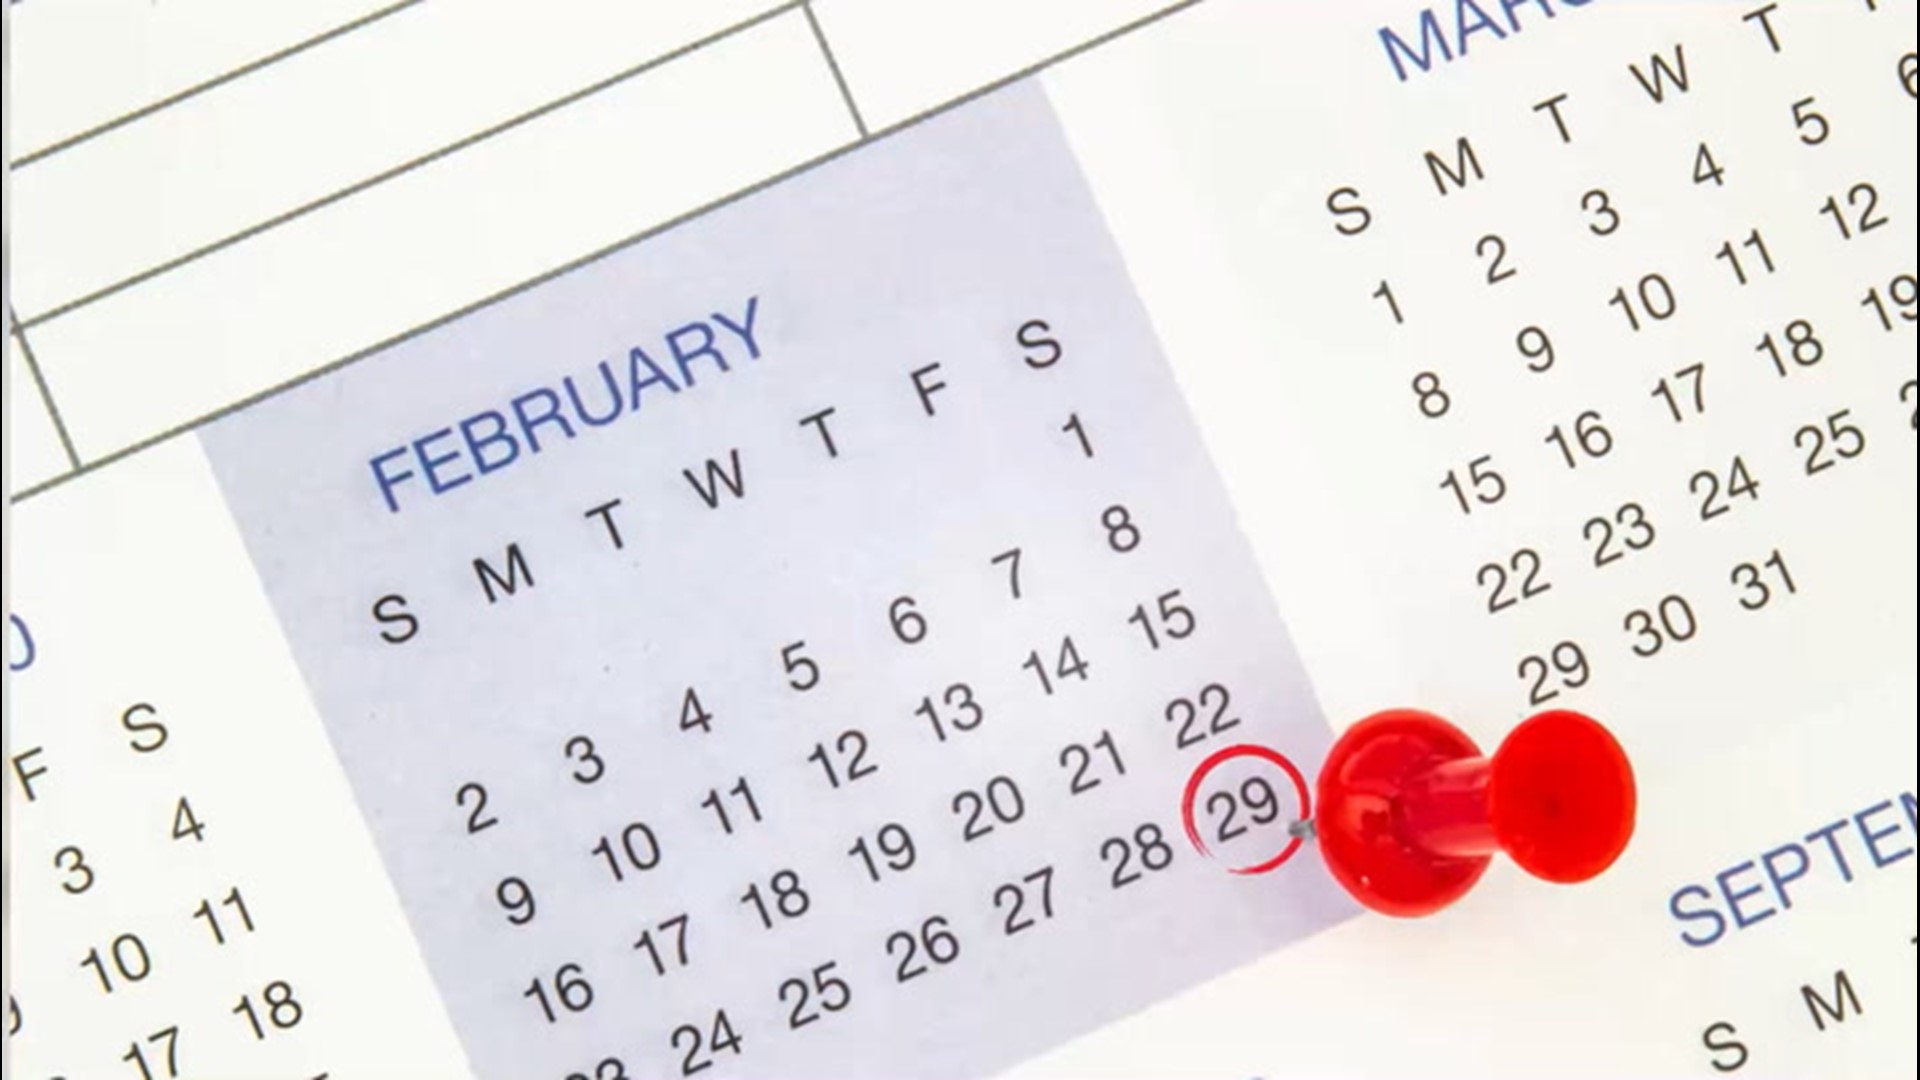 A leap year occurs once every four years, adding an extra day to the short month of February. Why do leap years exist?